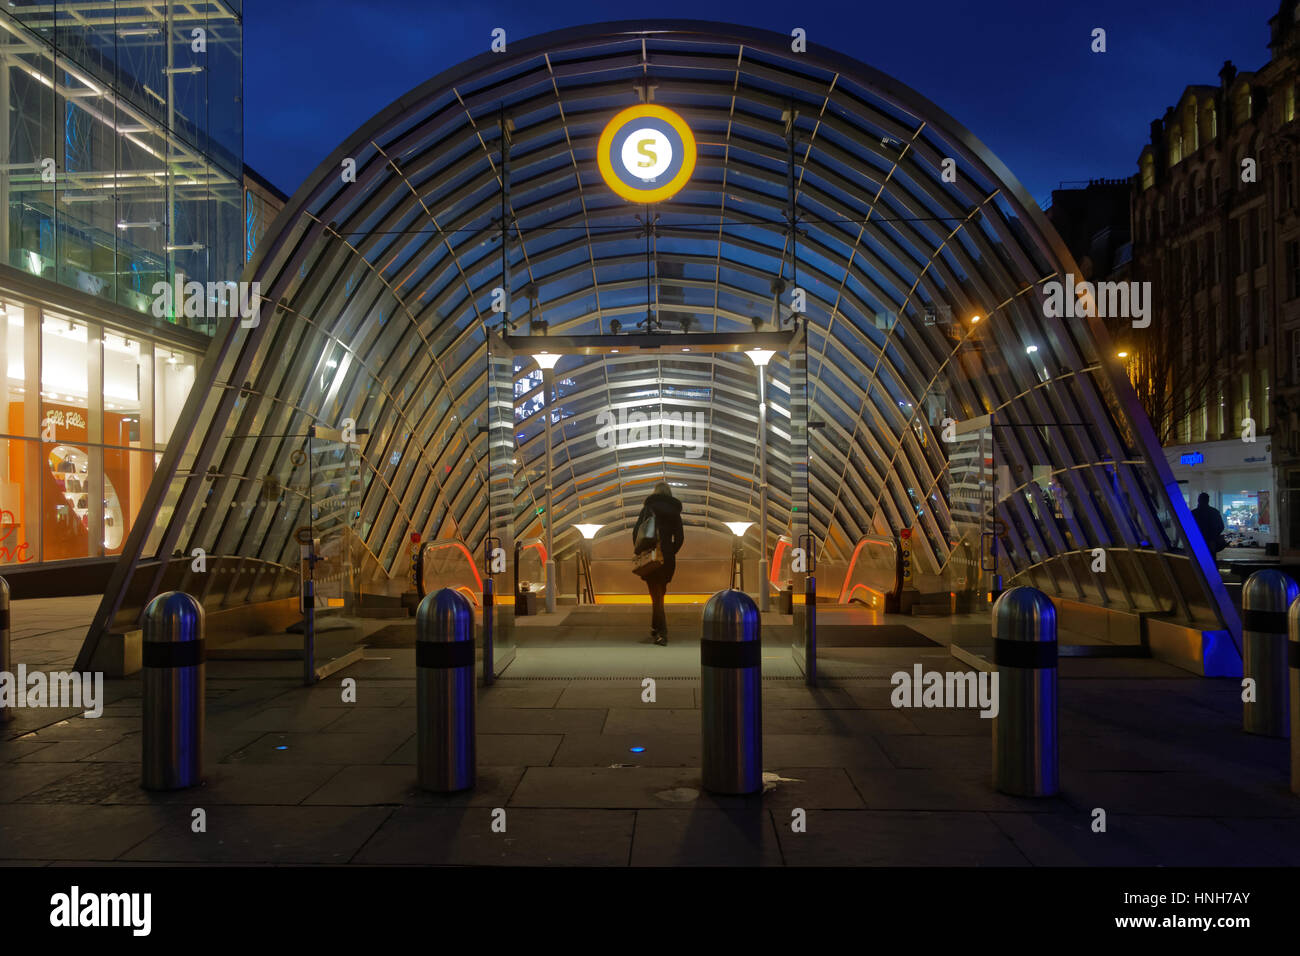 Glasgow underground or Subway entrance to st enoch station night Stock Photo